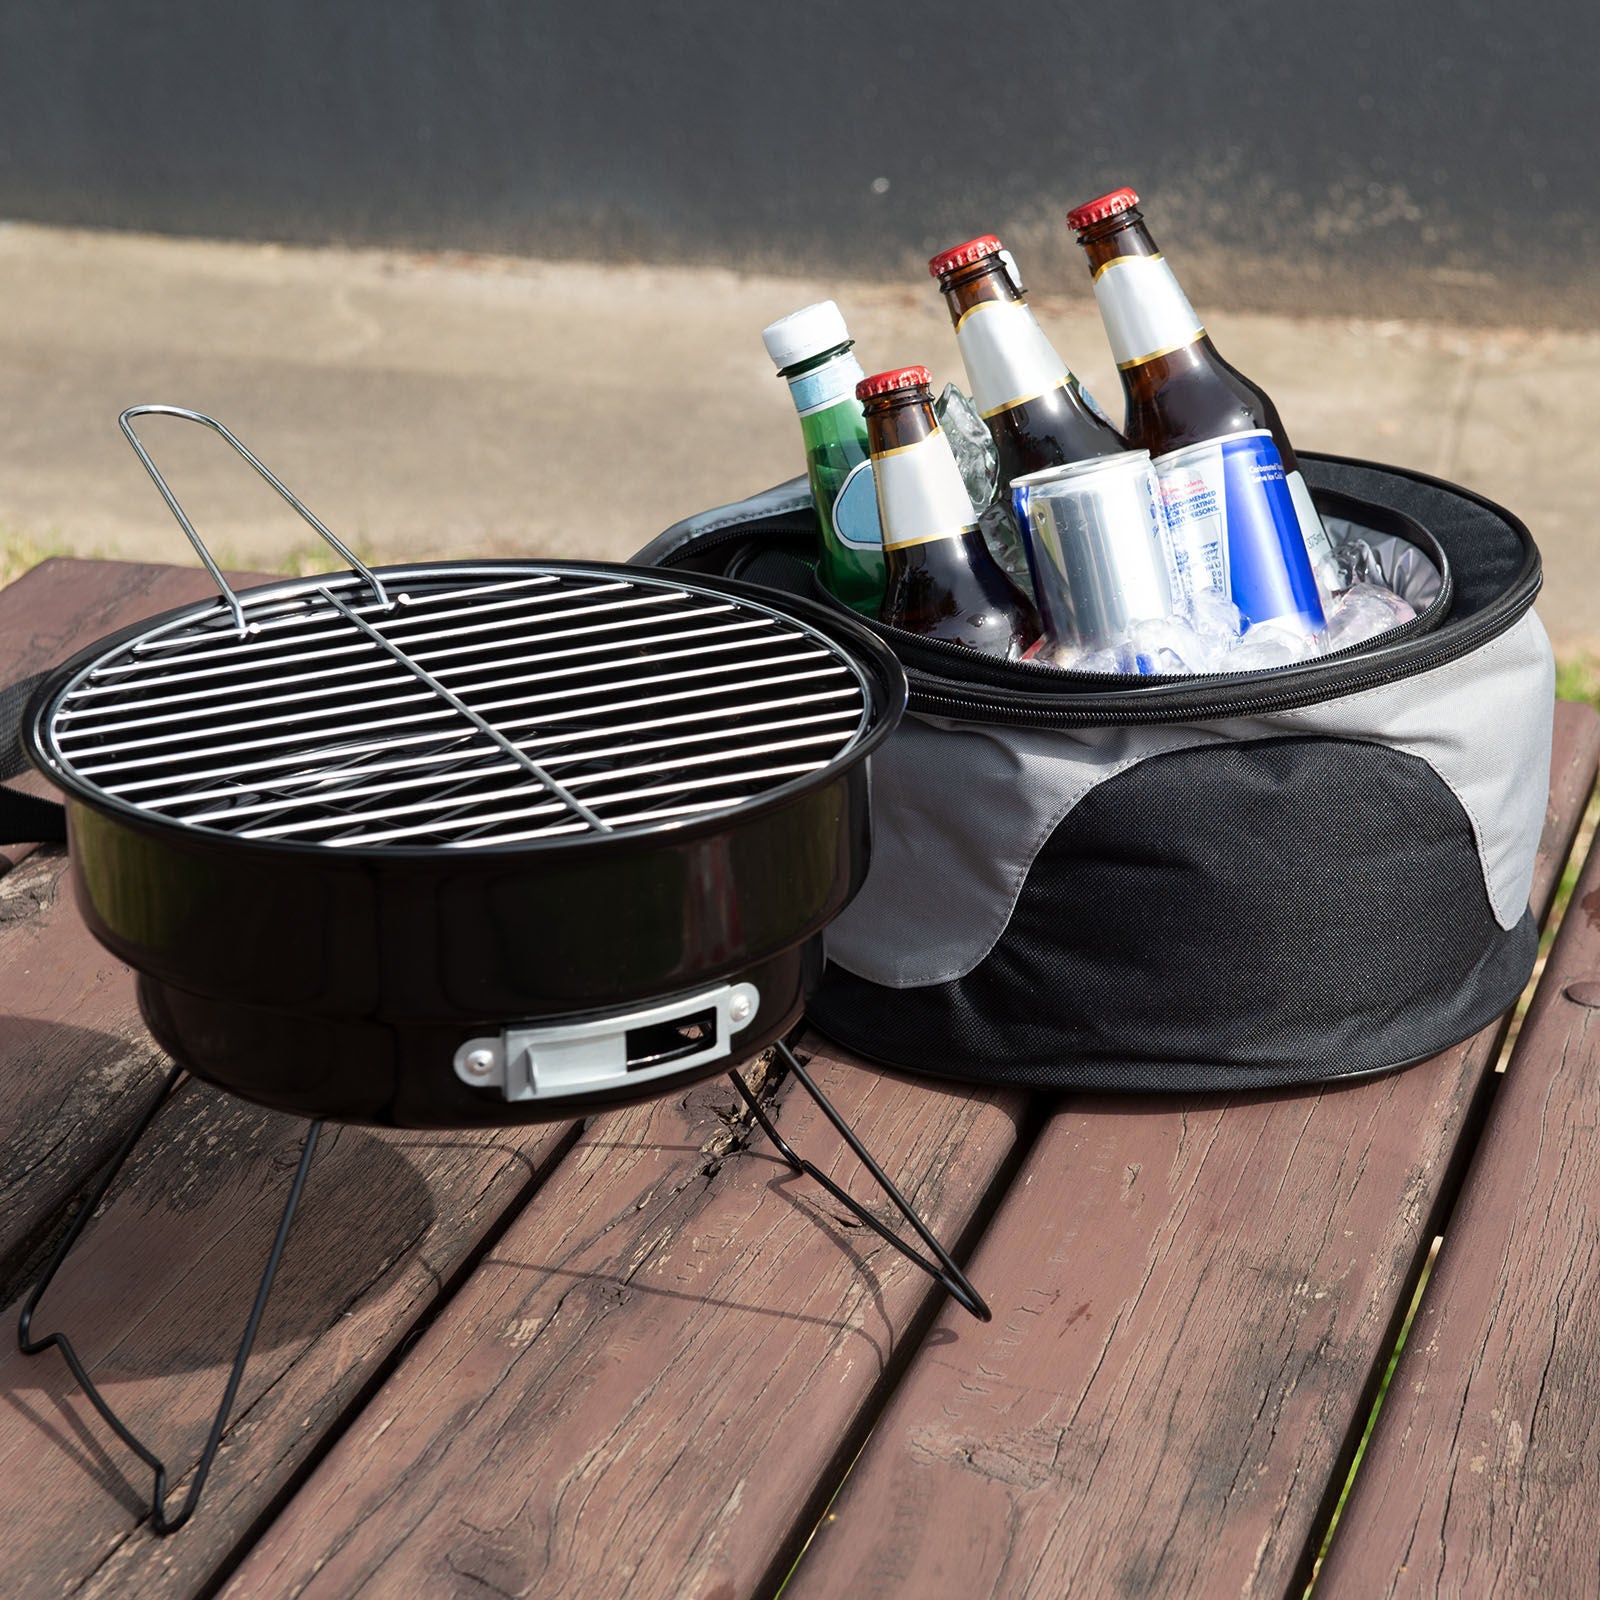 Havana Outdoors 2-IN-1 BBQ Grill Cooler Combo Set Outdoor Camping Picnic - SILBERSHELL